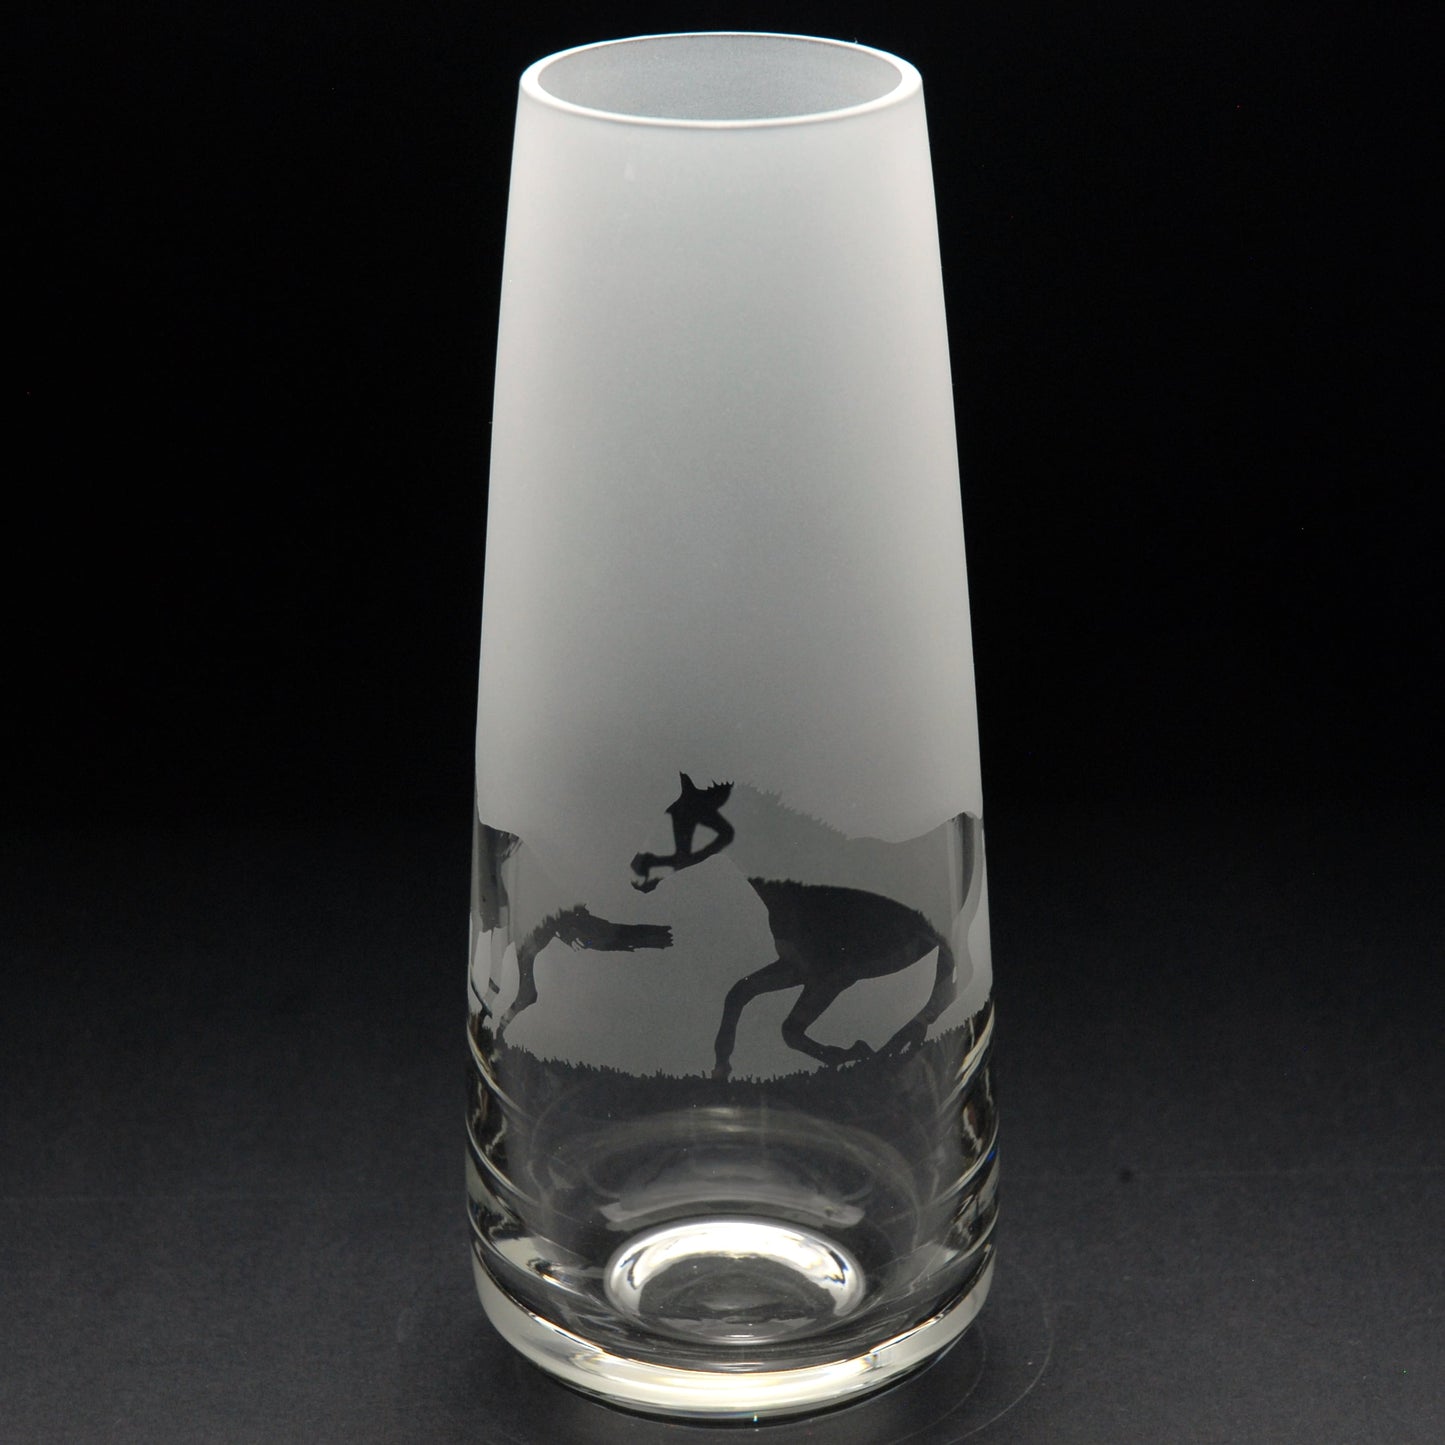 Galloping Horse Glass Bud Vase - 15cm - Hand Etched/Engraved Gift